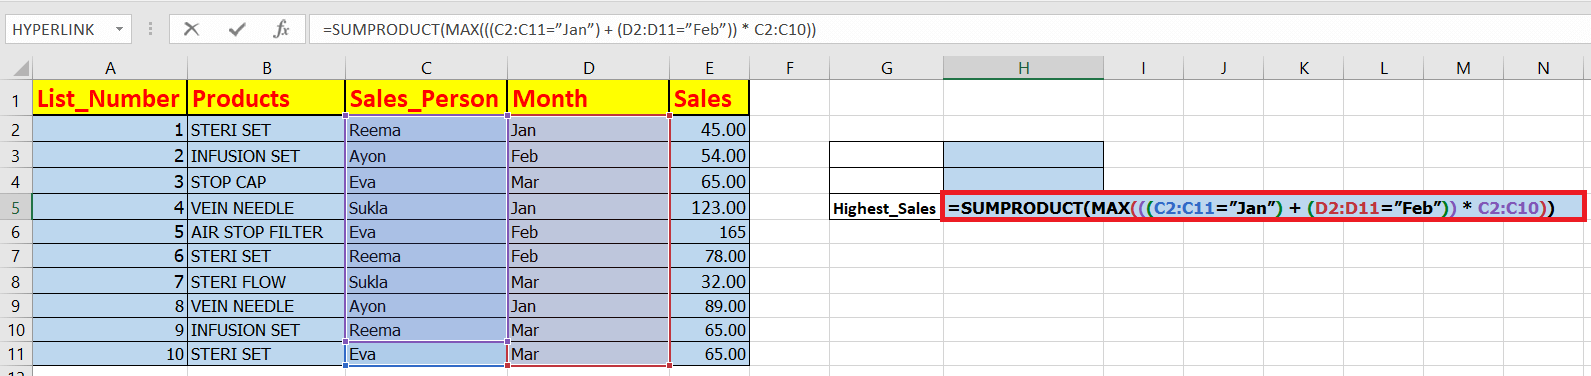 Excel MAX IF Formula: To get highest value with conditions